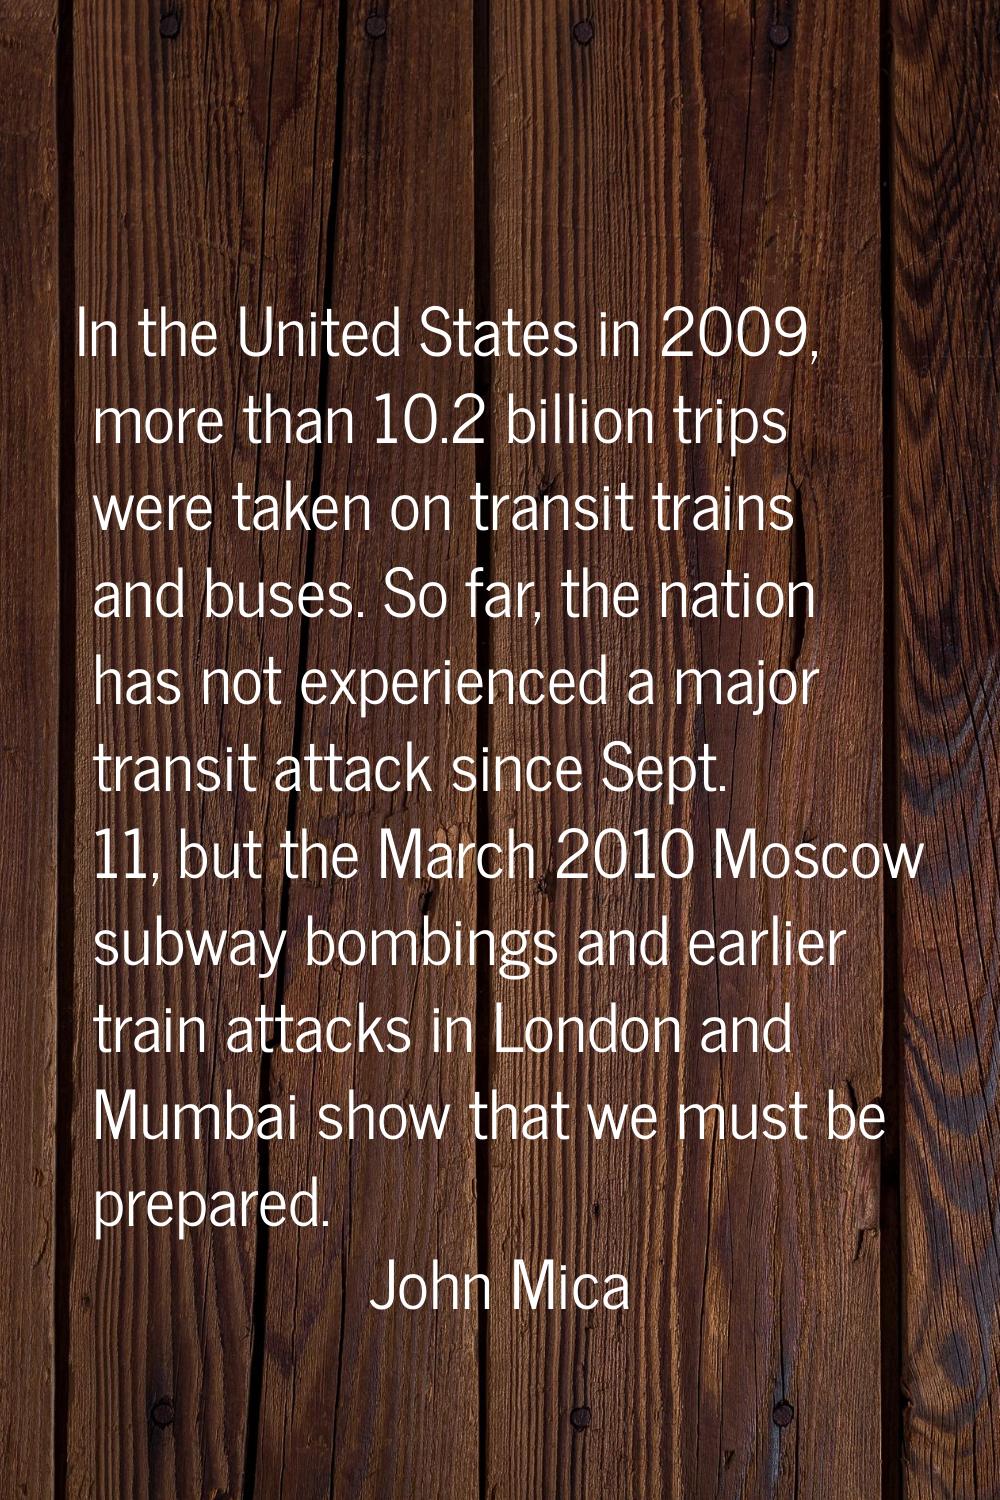 In the United States in 2009, more than 10.2 billion trips were taken on transit trains and buses. 